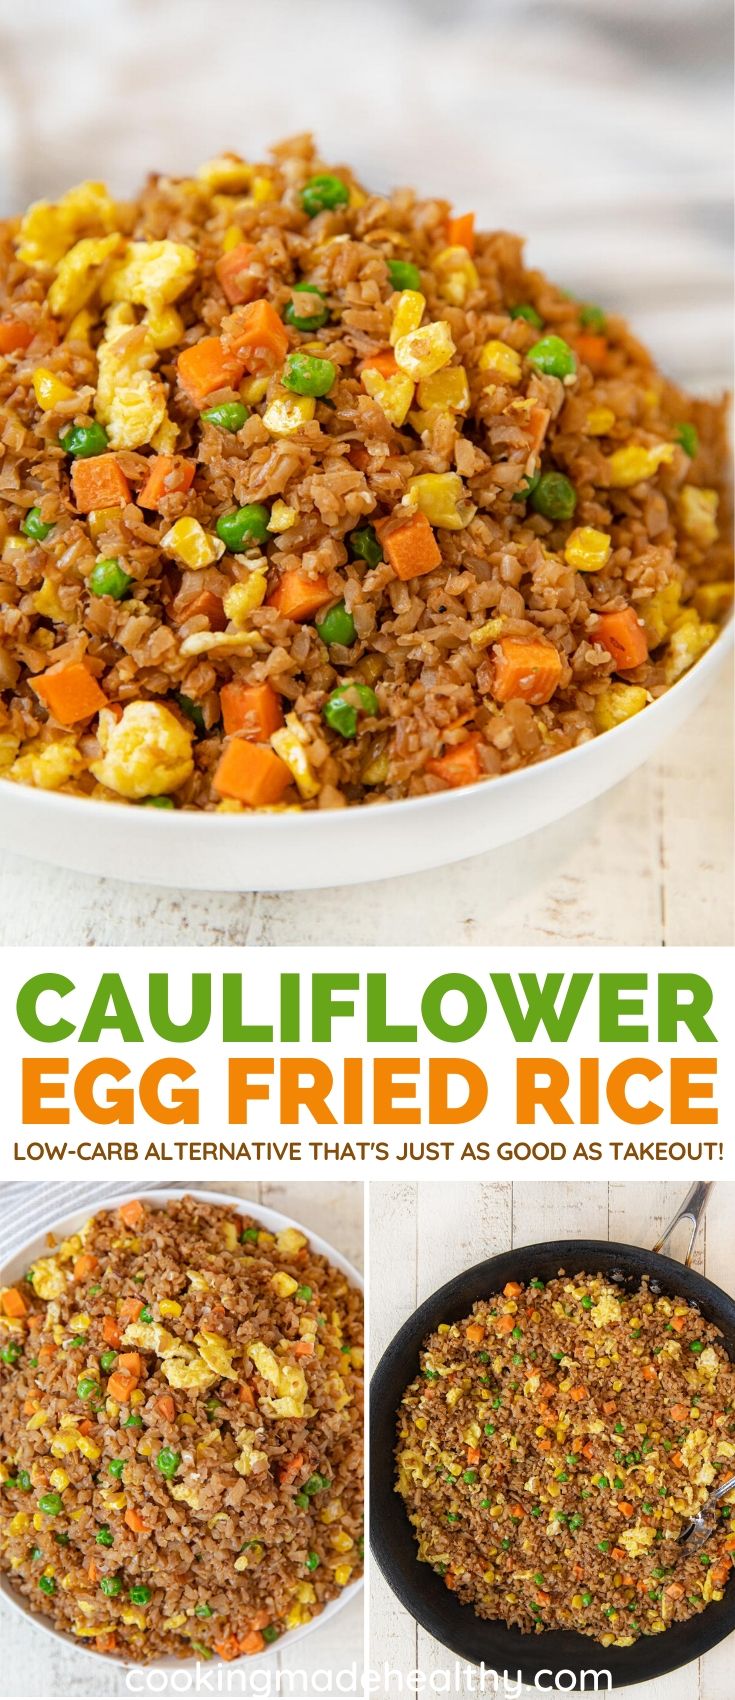 BEST EVER Cauliflower Egg Fried Rice (w/egg) - Cooking Made Healthy